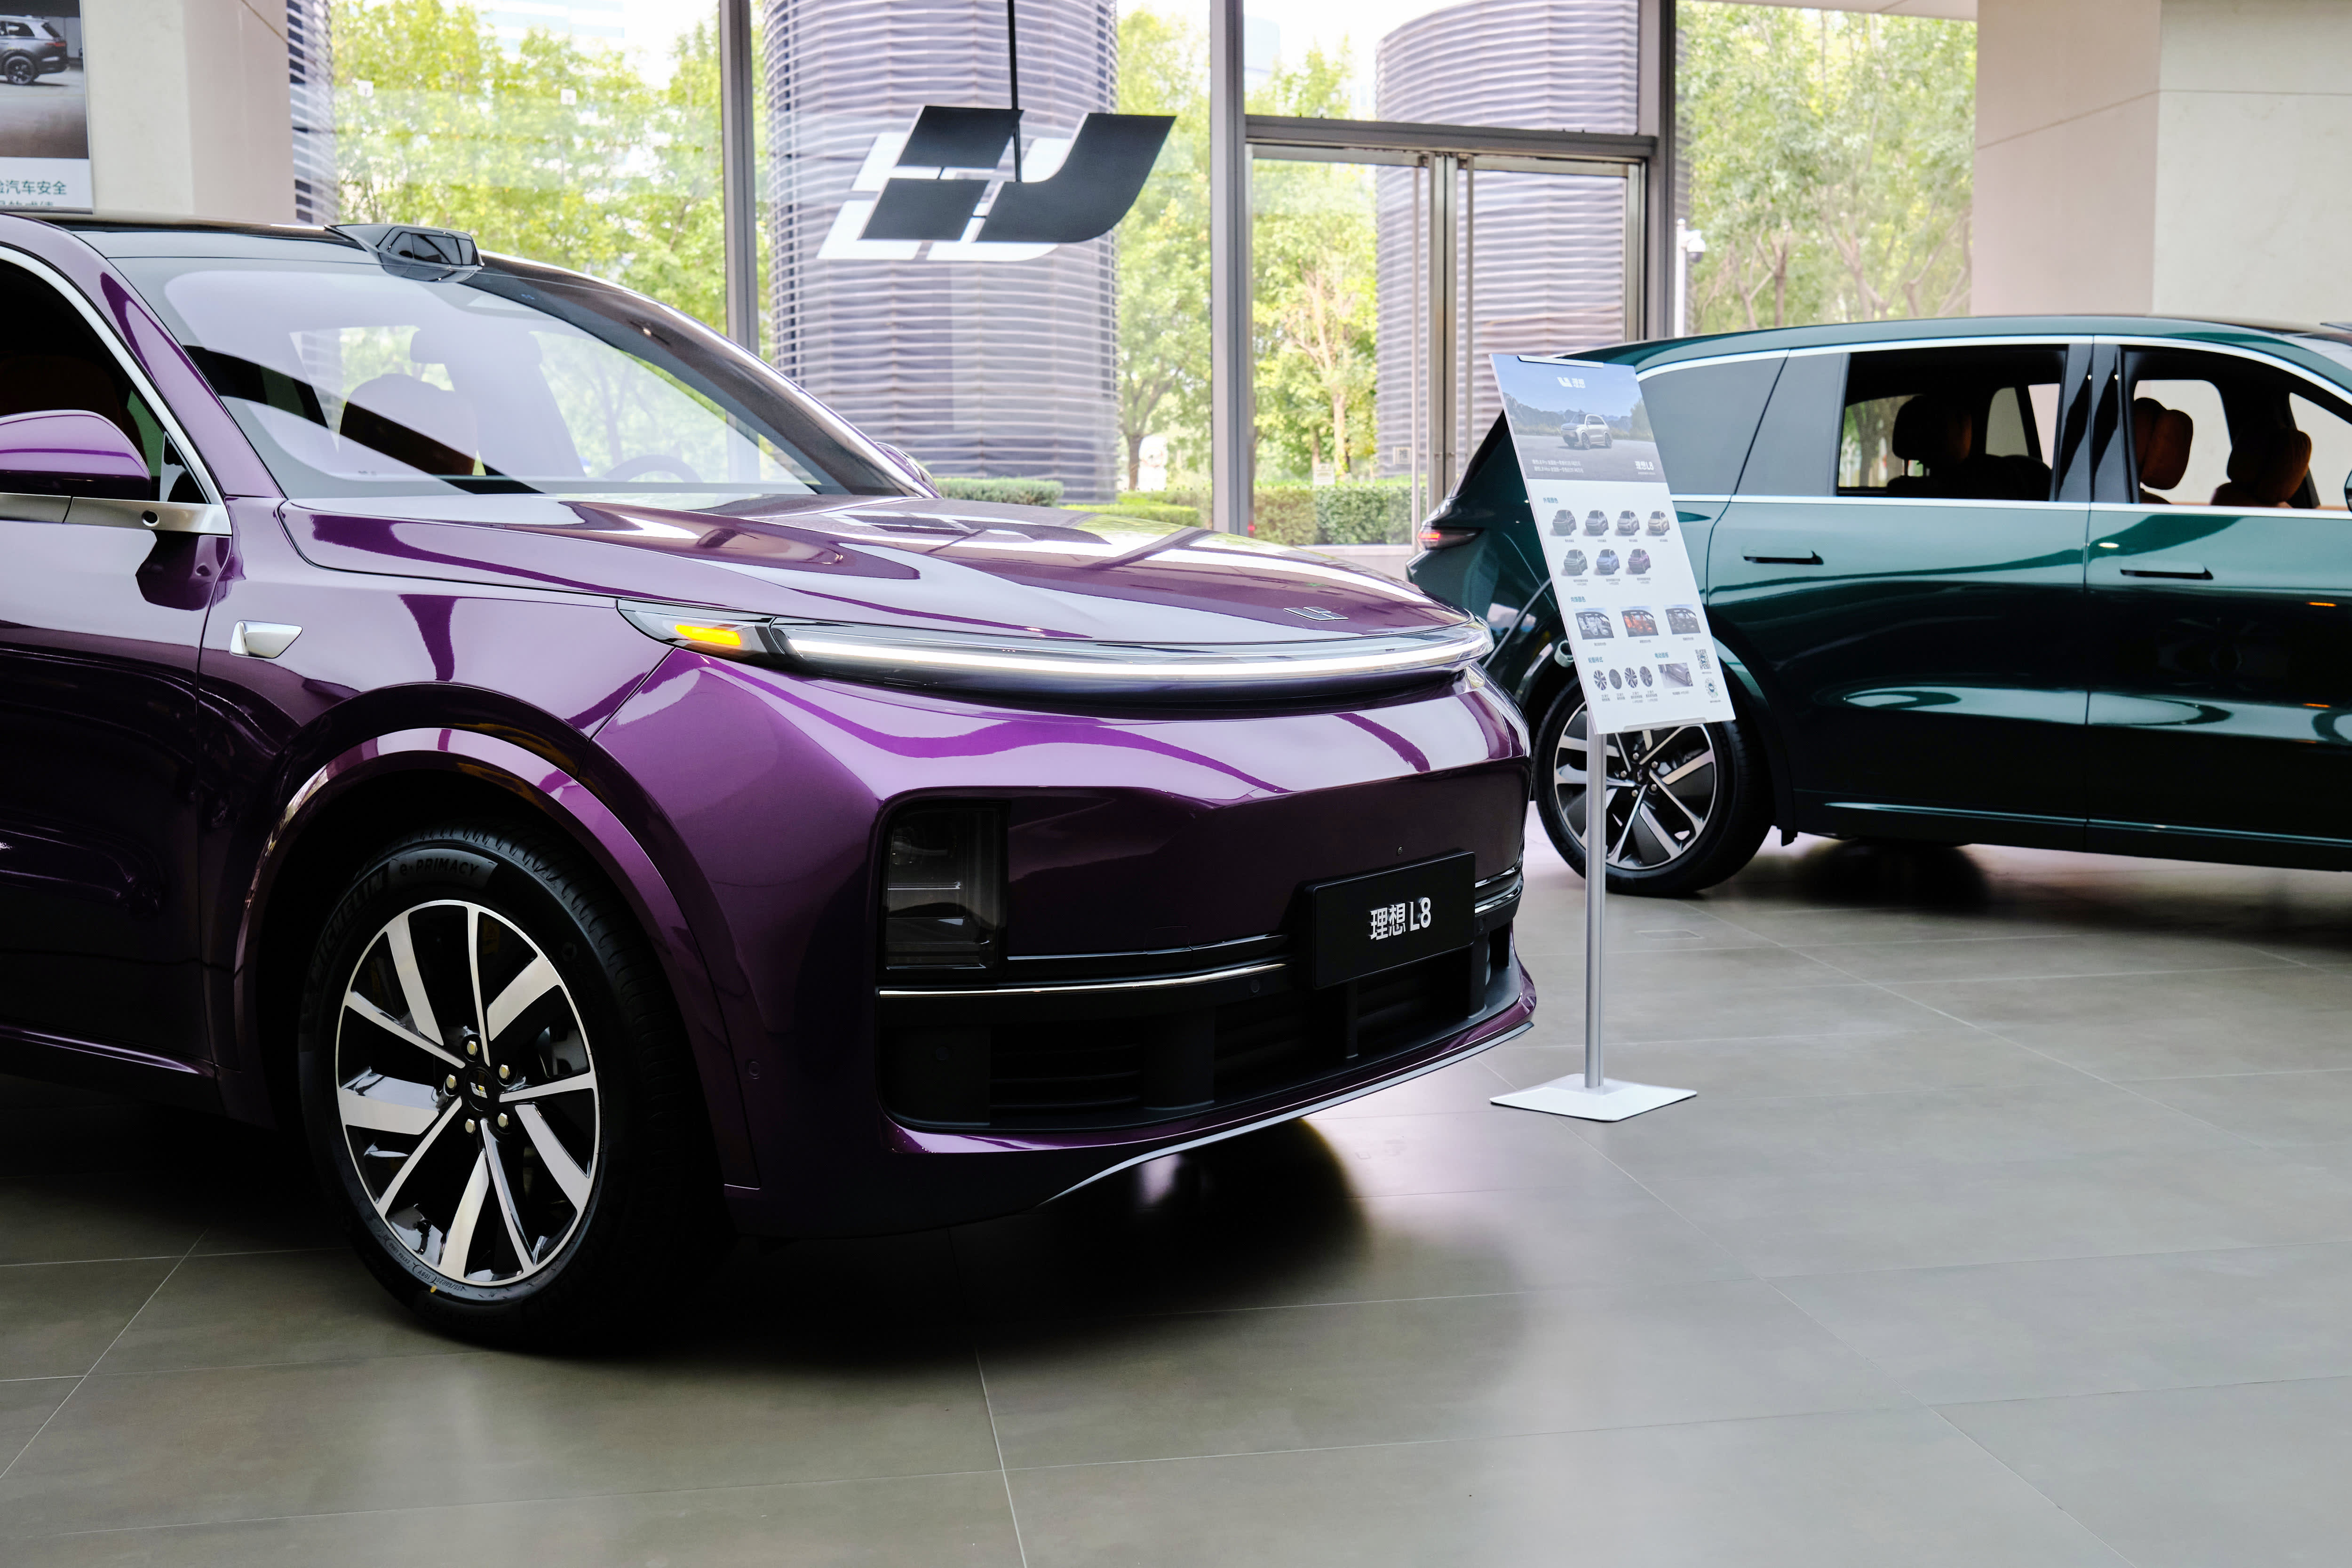 Chinese EV brand Li Auto sees first-quarter deliveries surge by 66%